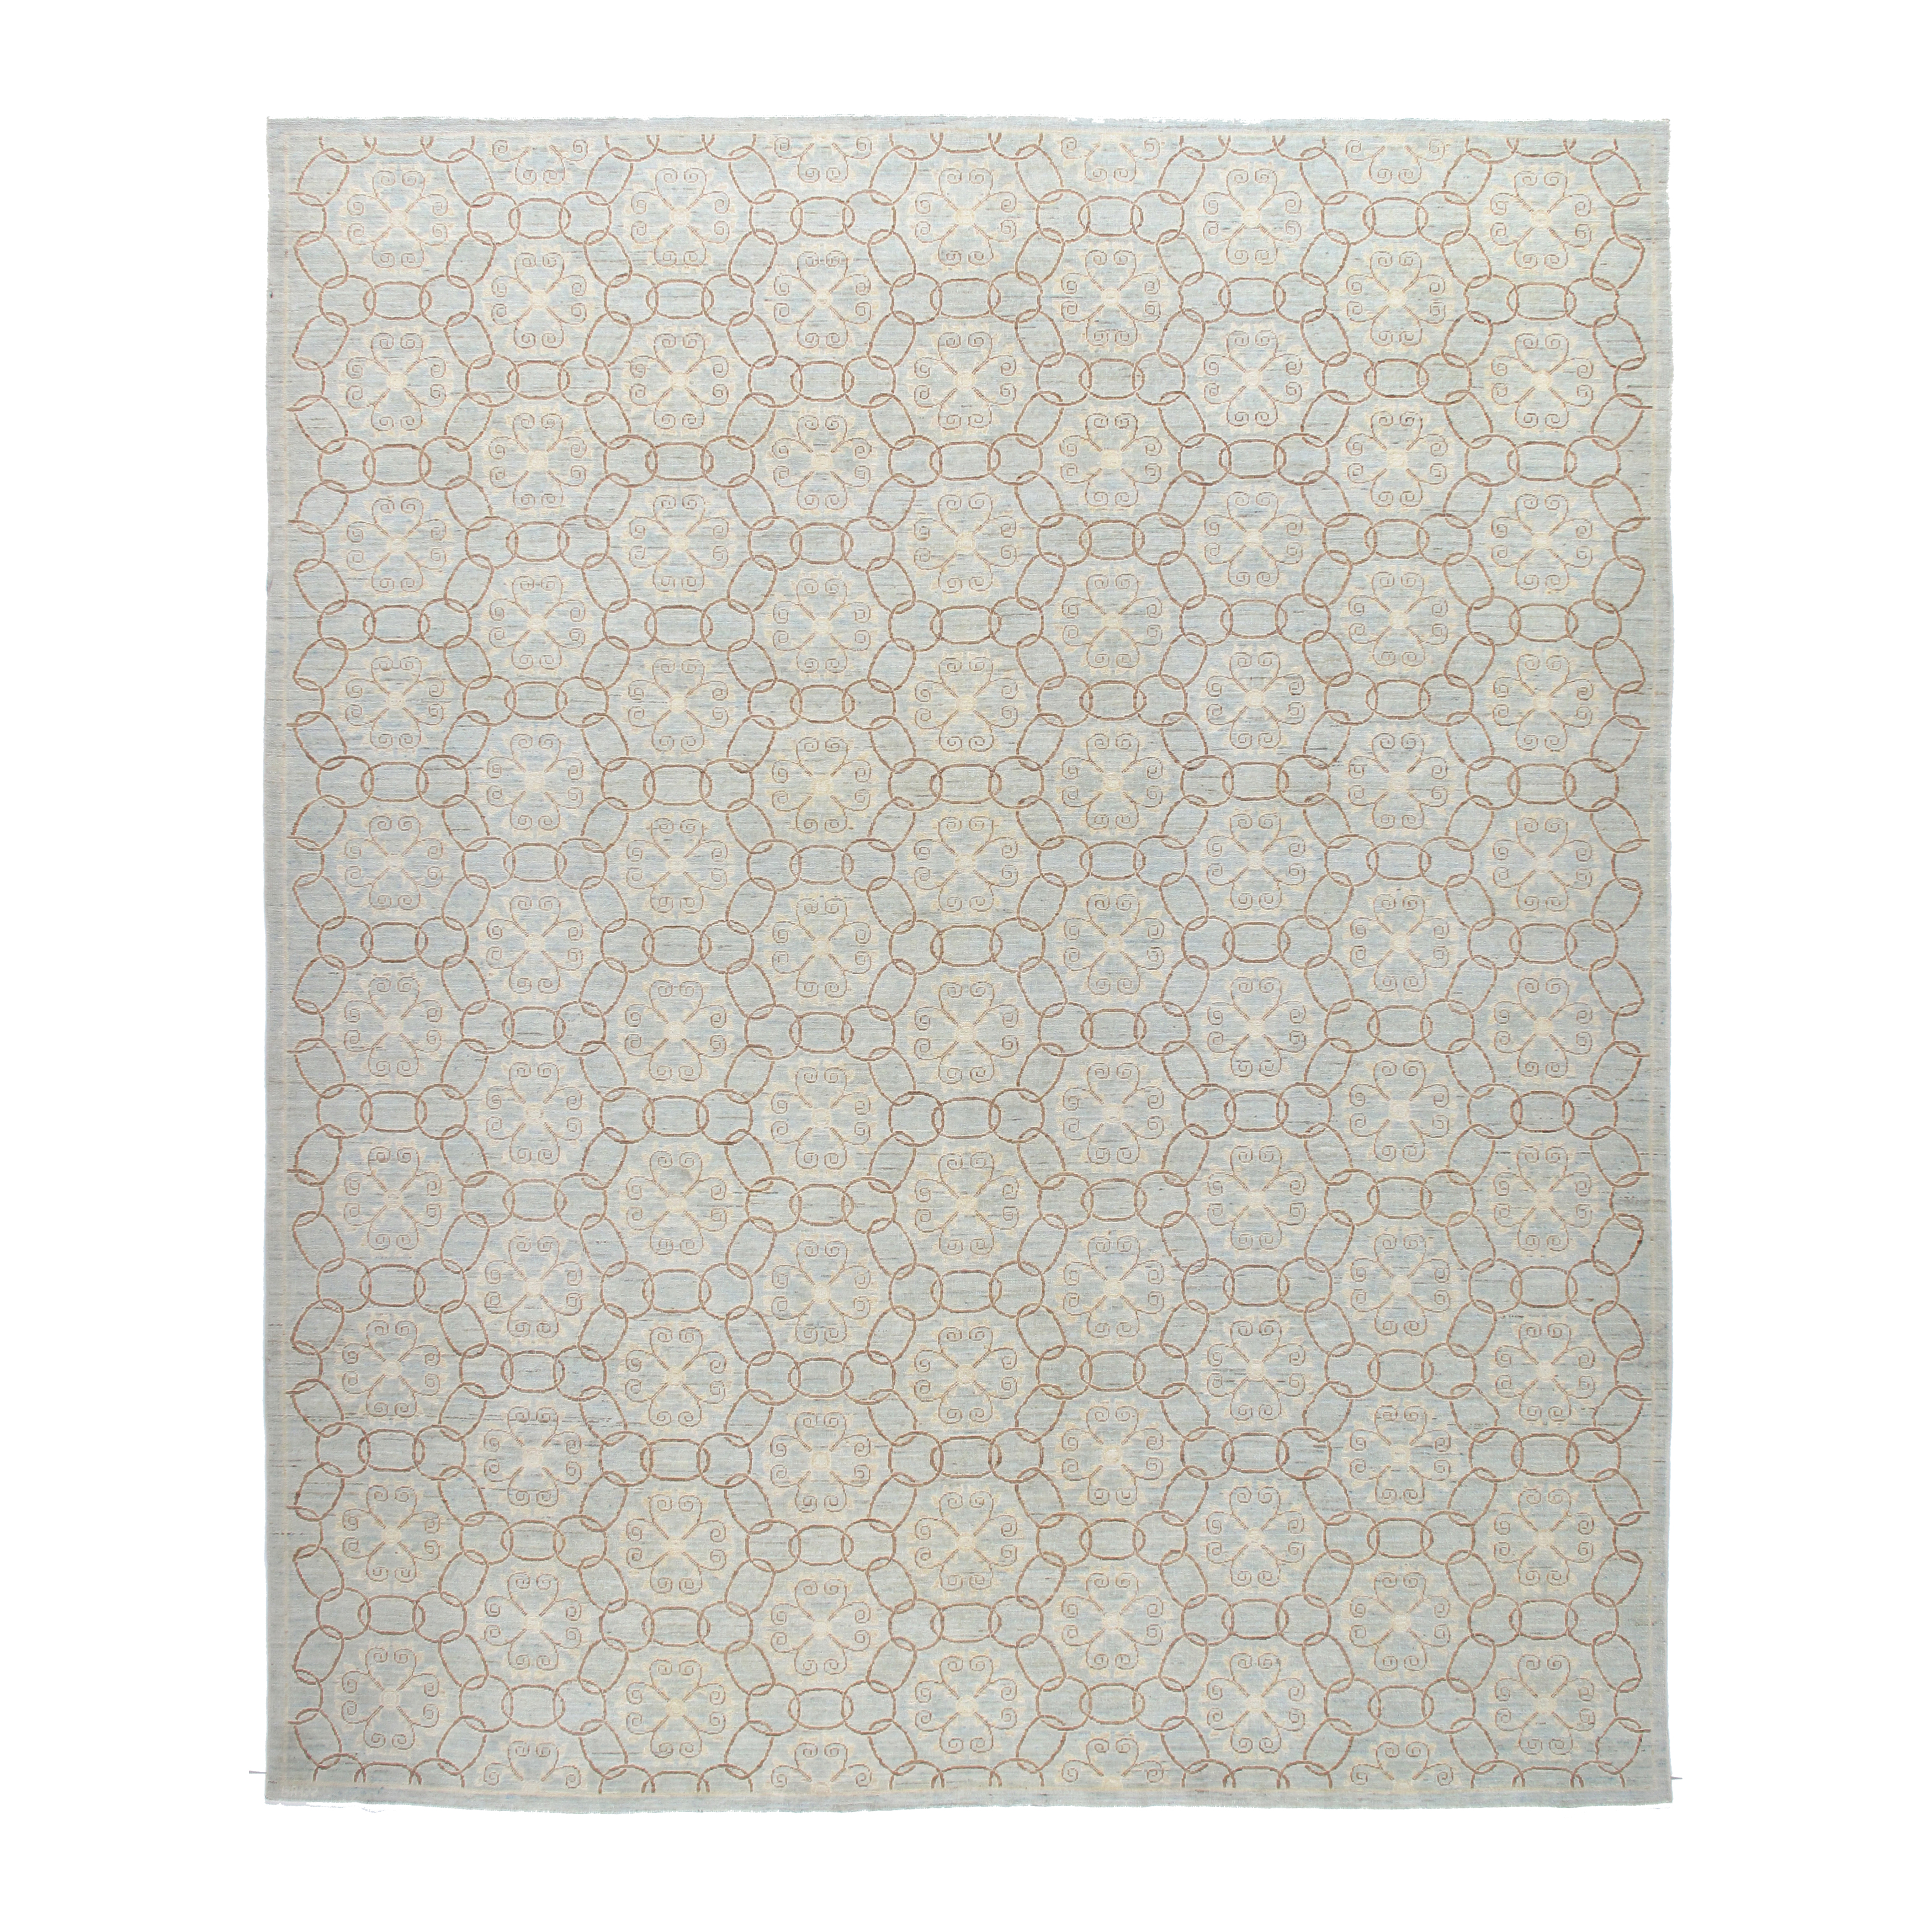 Our Charlotte rug is handknotted from the finest hand-carded, hand-spun, naturally dyed wool.